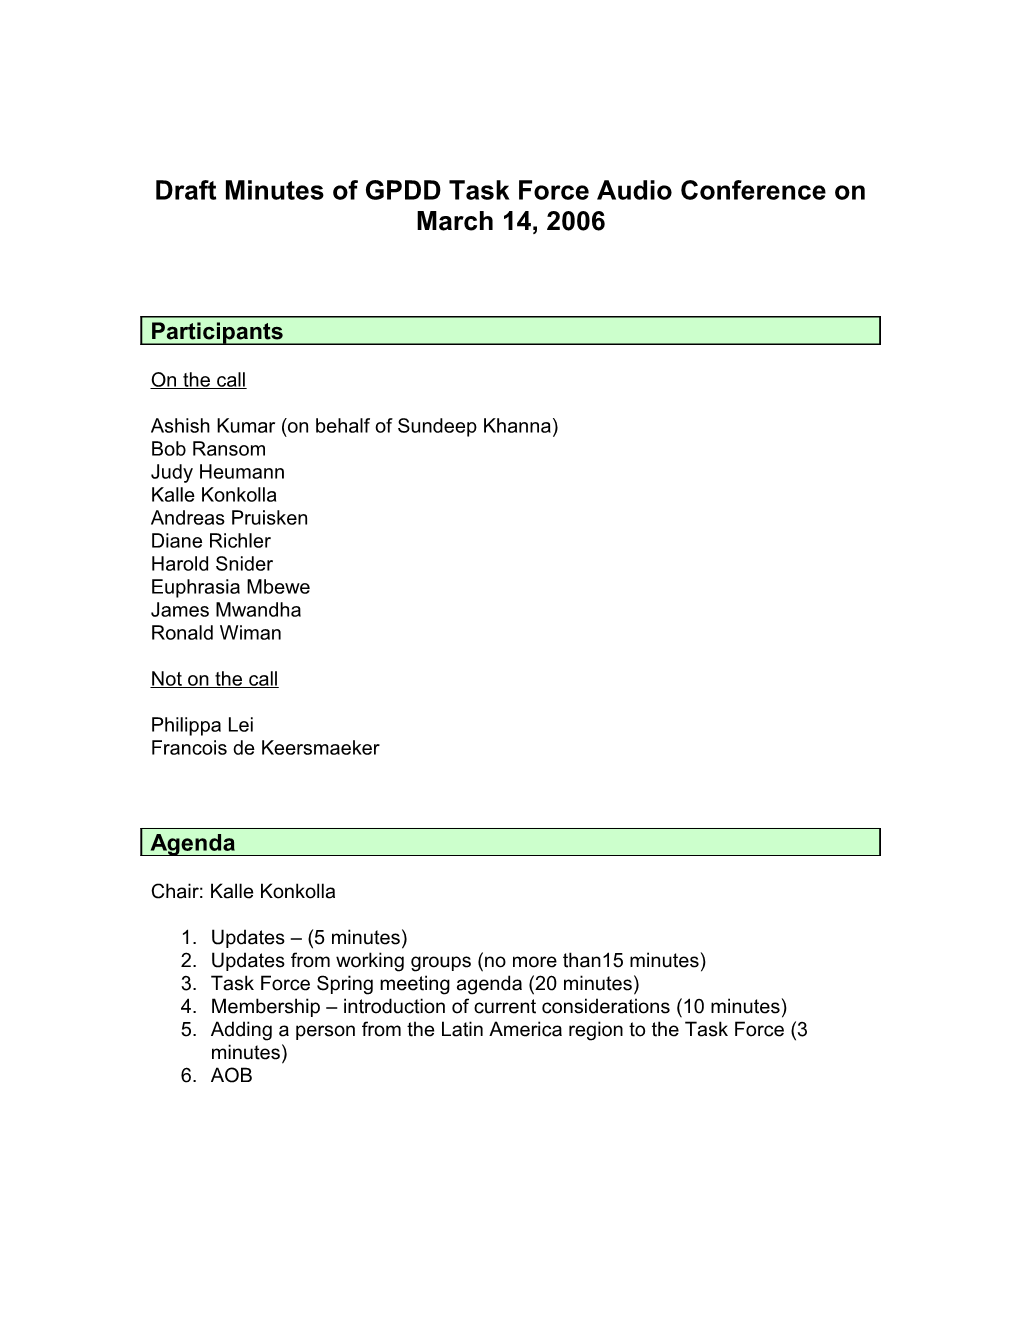 Draft Minutes of GPDD Task Force Audio Conference On